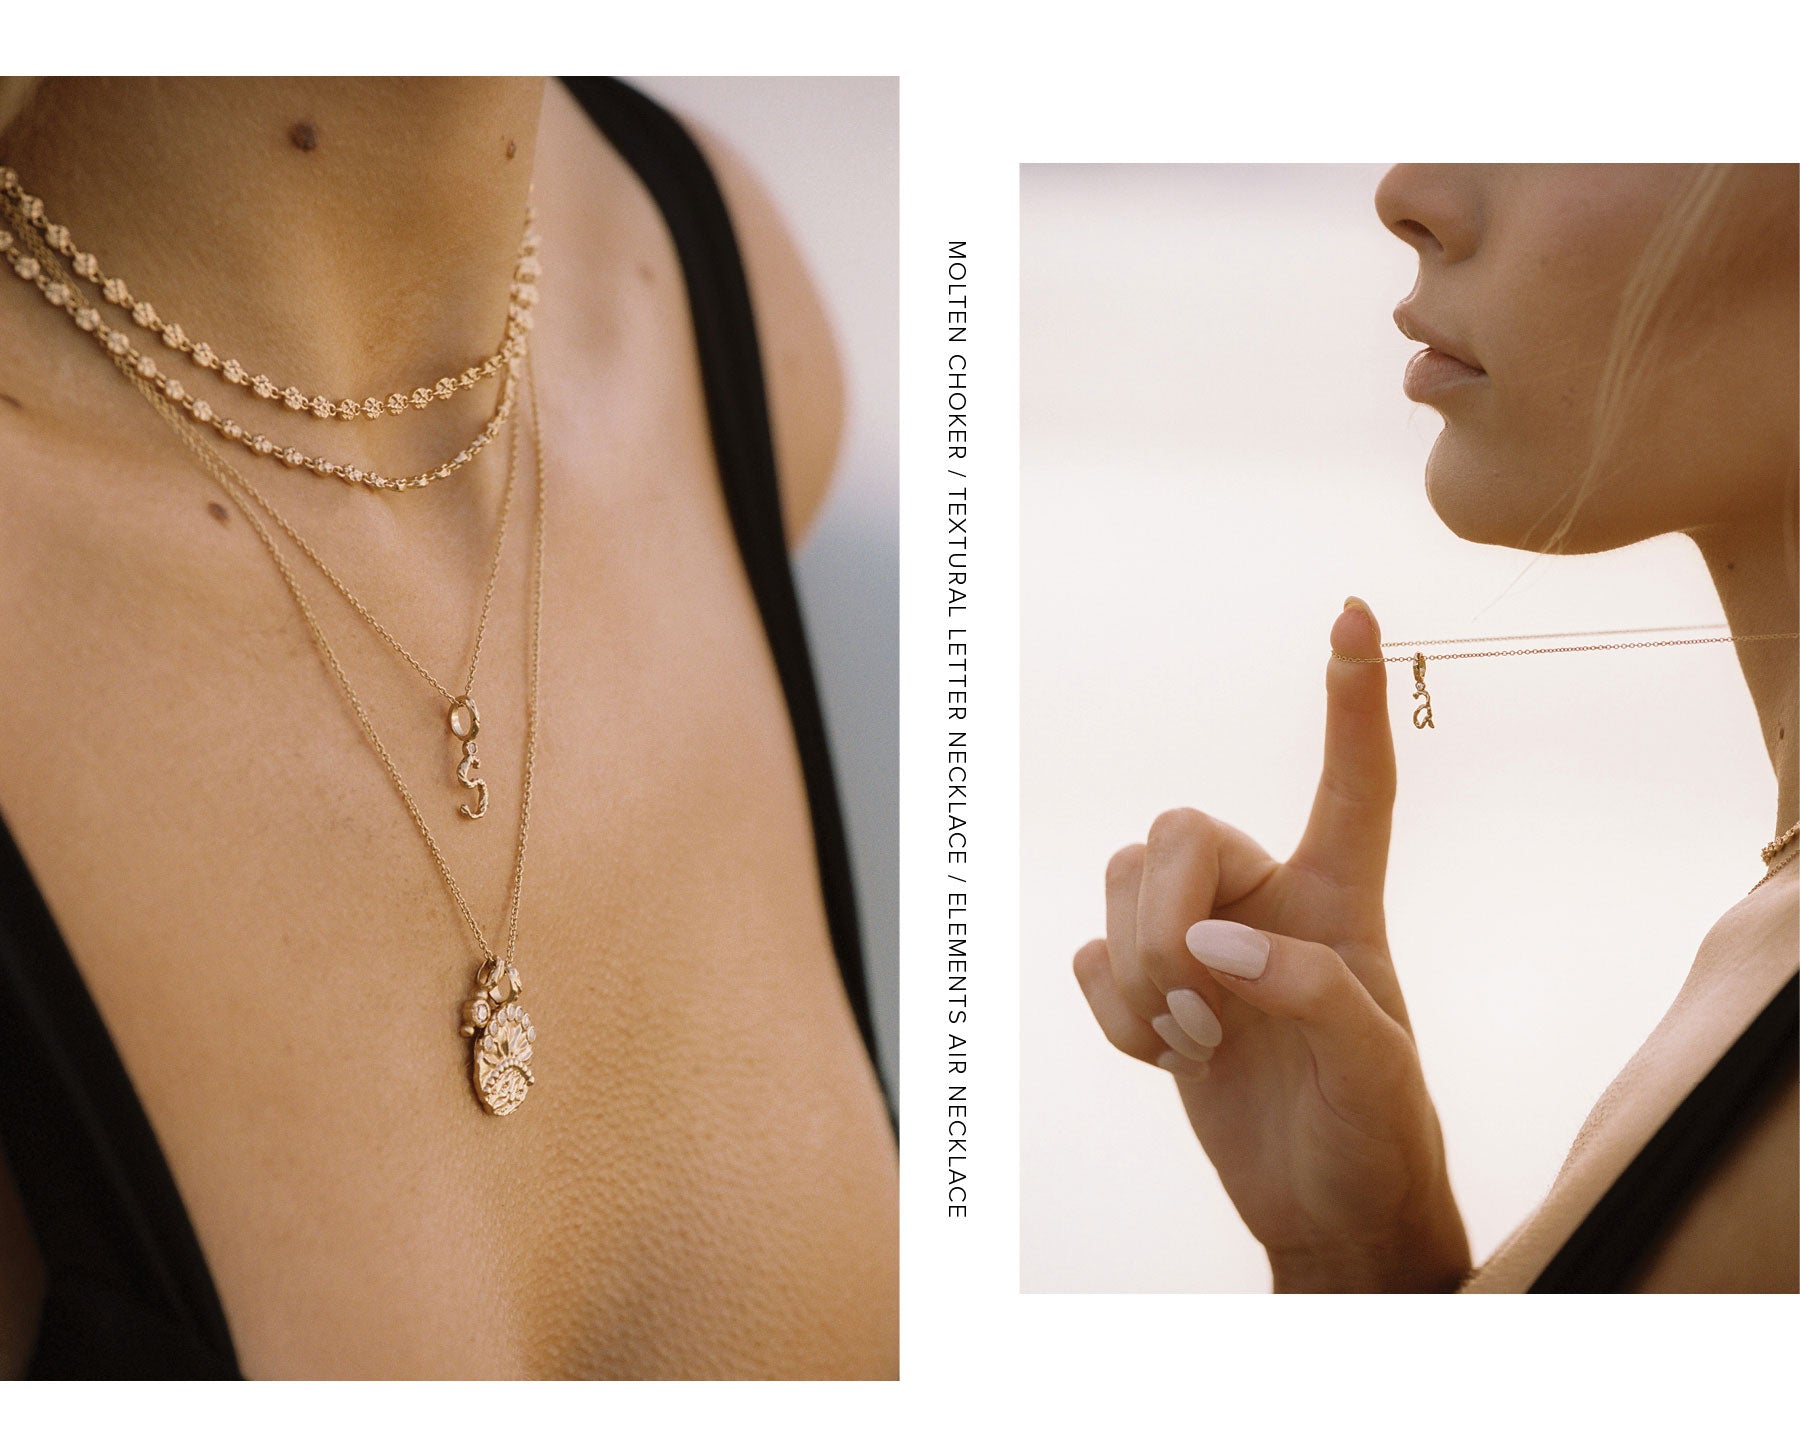 Two Images Side By Side Of Model Holding Jewellery In Finger And On Neck